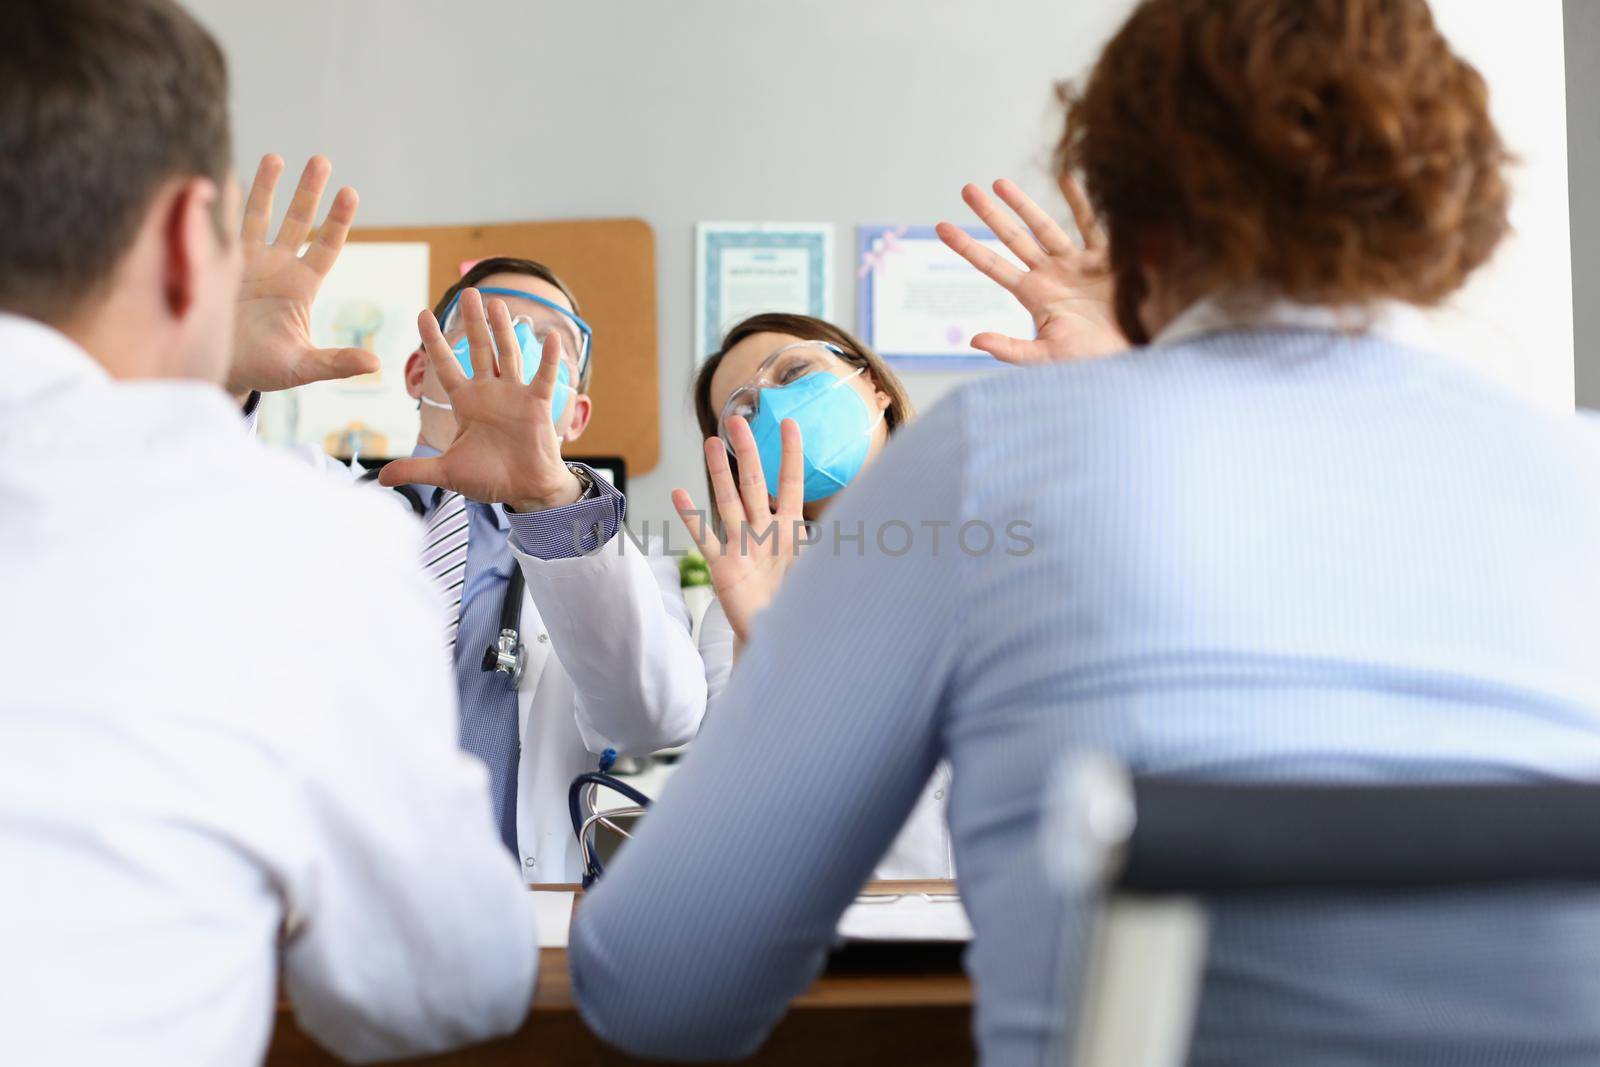 Portrait of medical workers protect from patients wearing face mask and glasses. Man and woman doctors consult clients in office. Healthcare, help concept